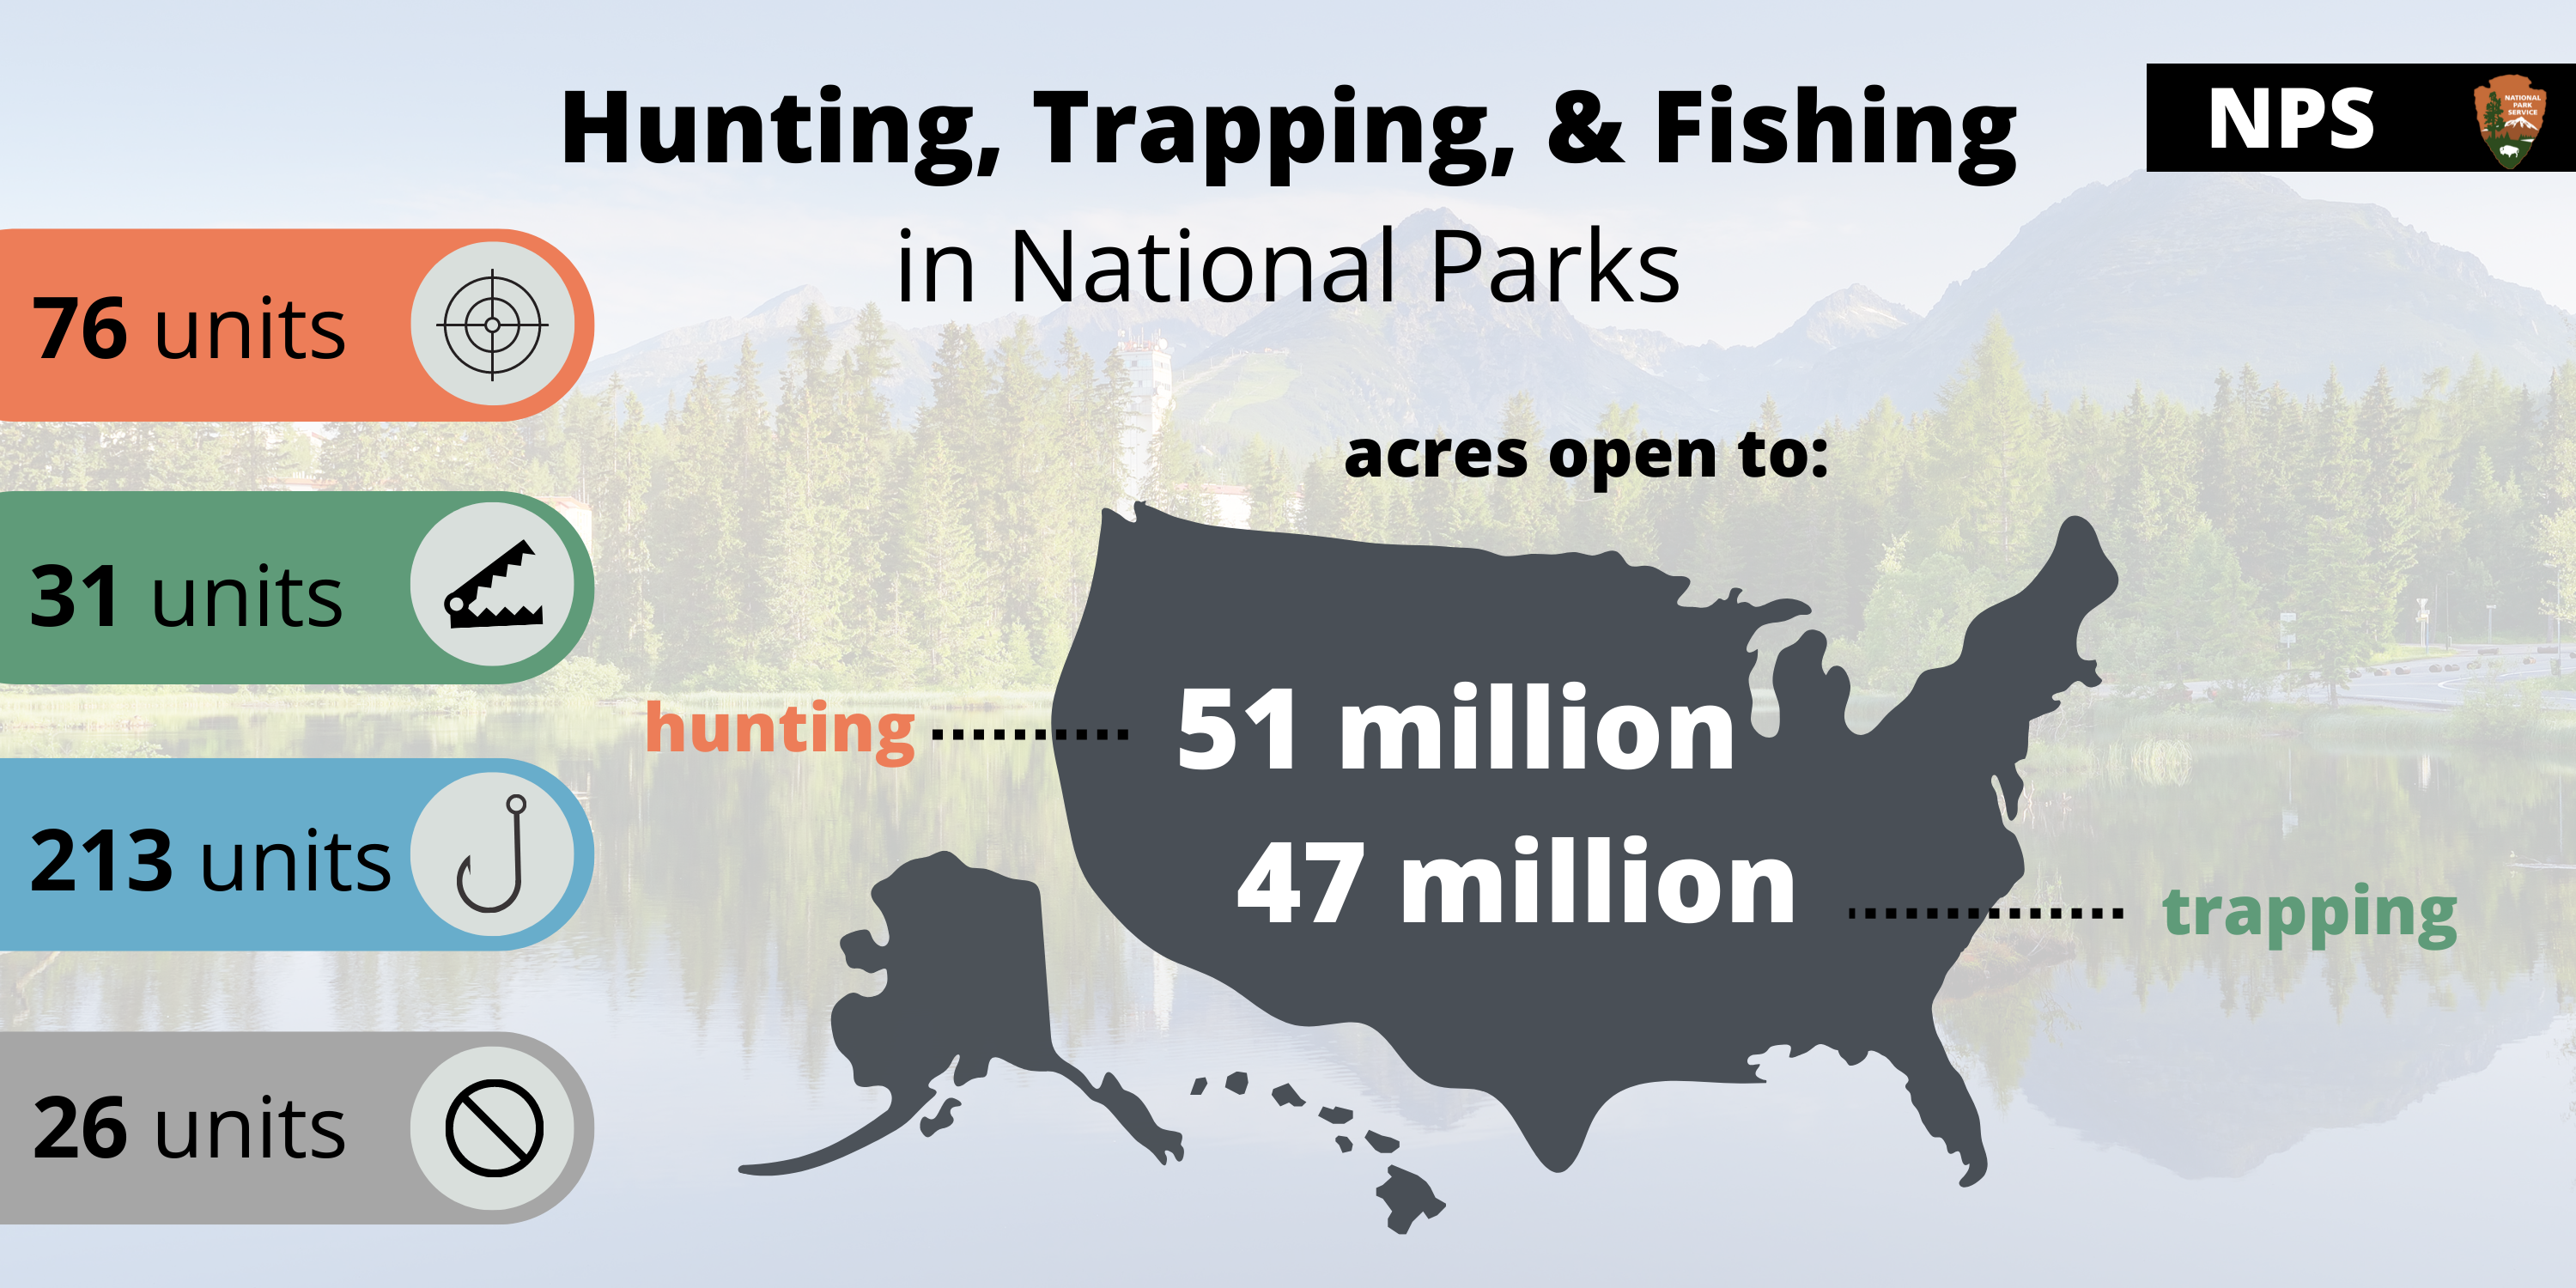 https://www.nps.gov/articles/000/images/hunting-trapping-fishing-1.png